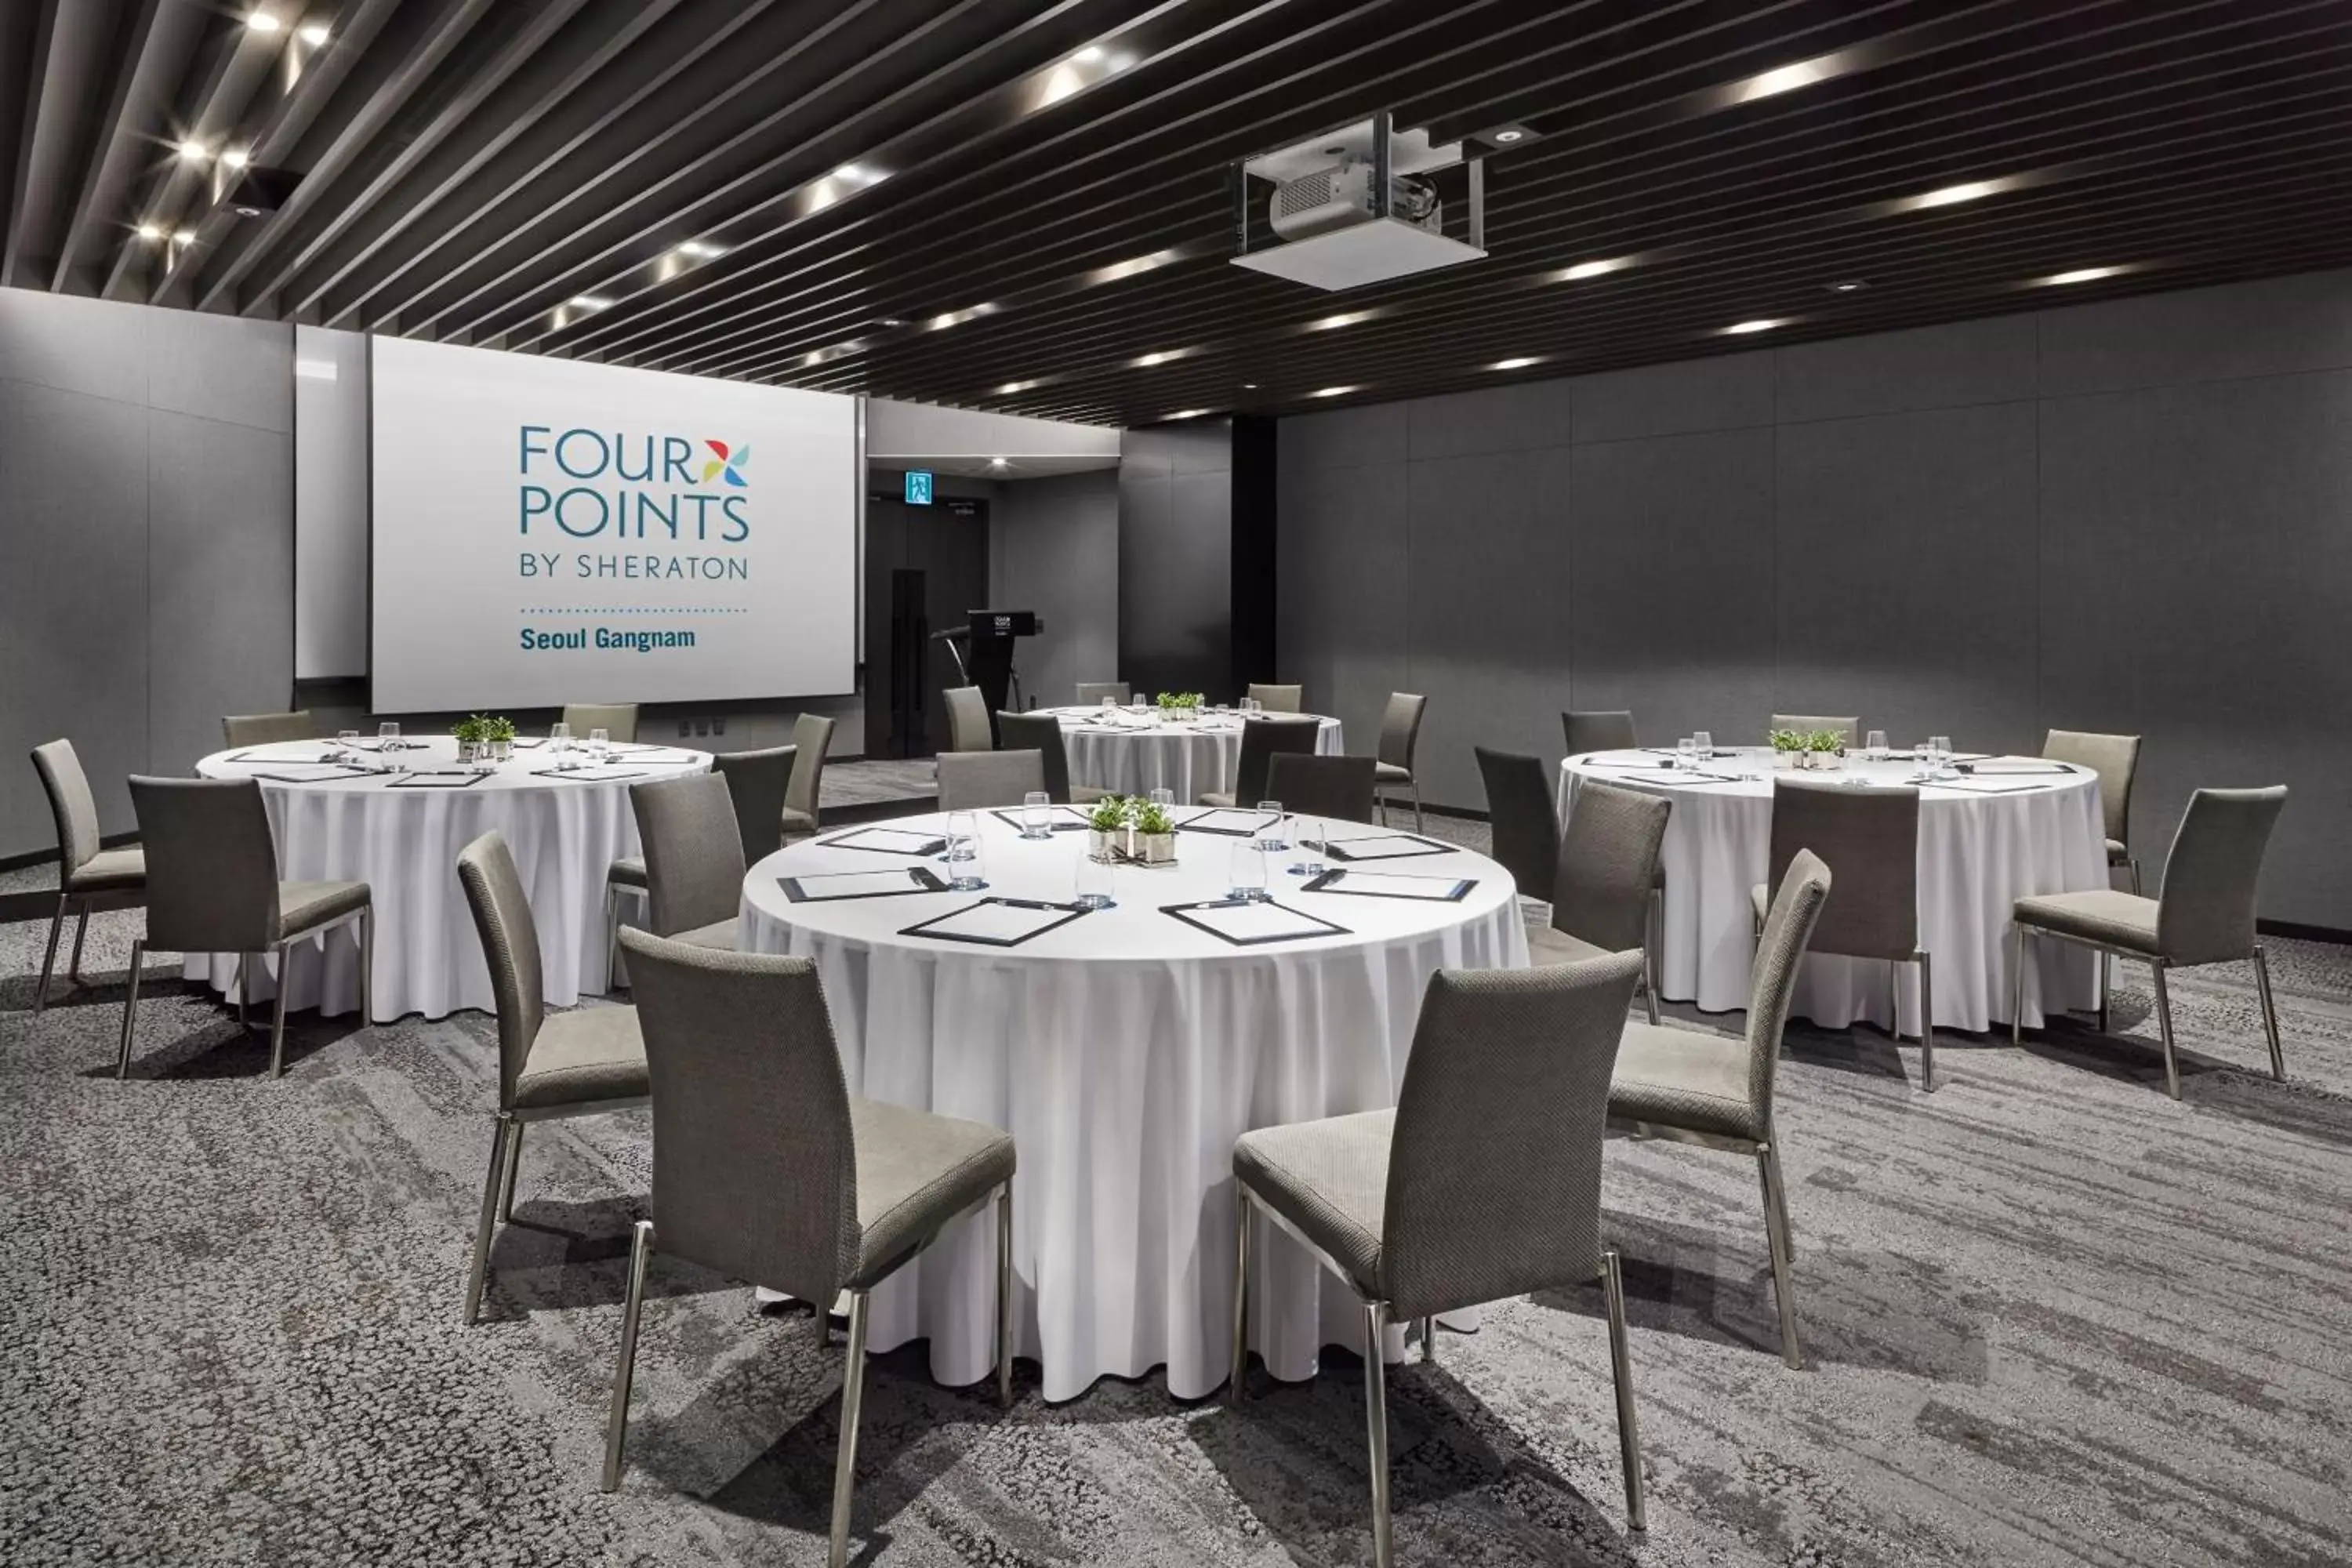 Meeting/conference room, Banquet Facilities in Four Points by Sheraton Seoul Gangnam